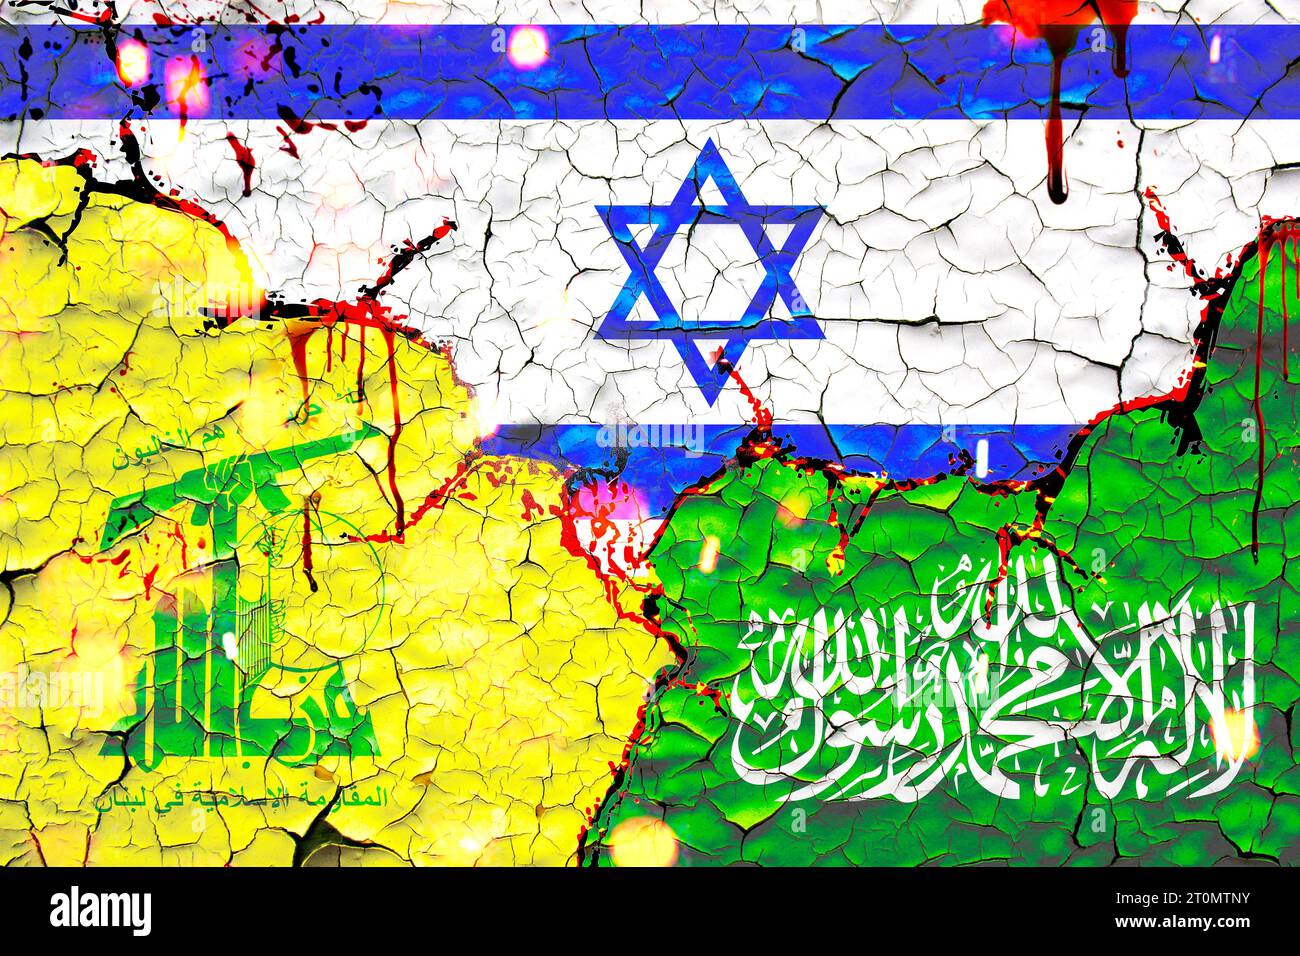 israel, hezbollah and hamas flags. painted over cracked concrete wall. Stock Photo